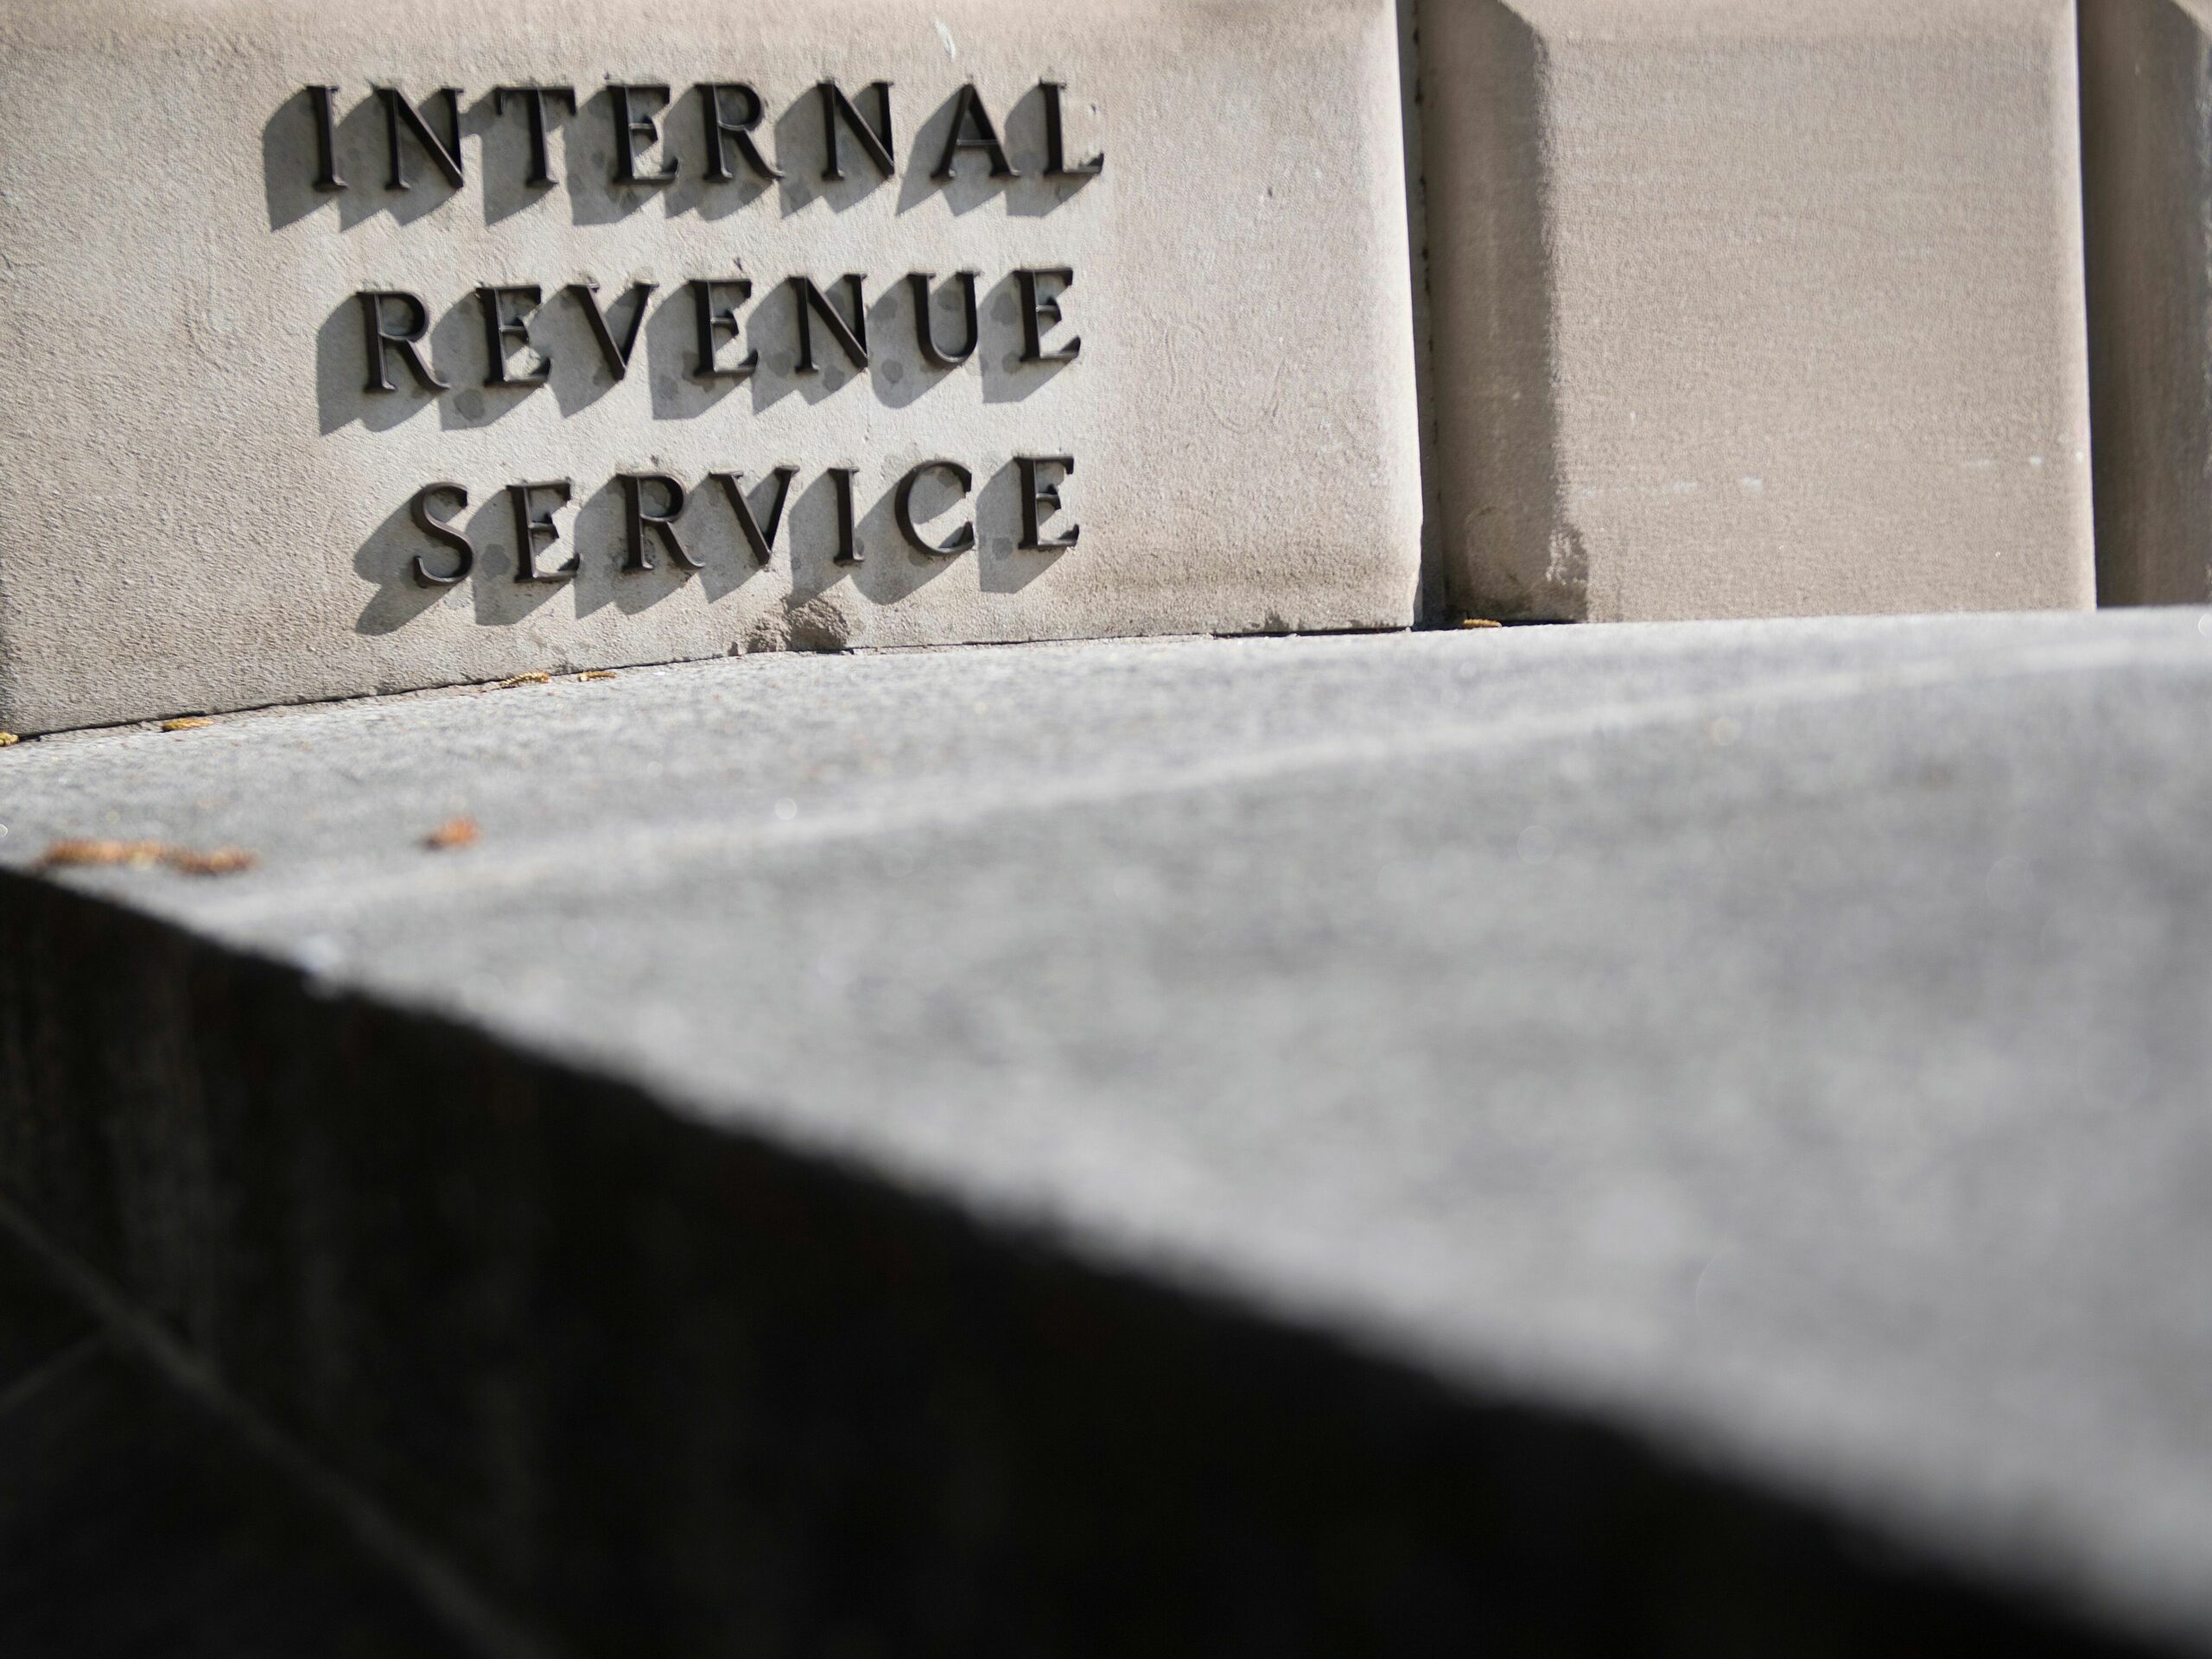 The IRS touts improved customer service and a hassle free filing option